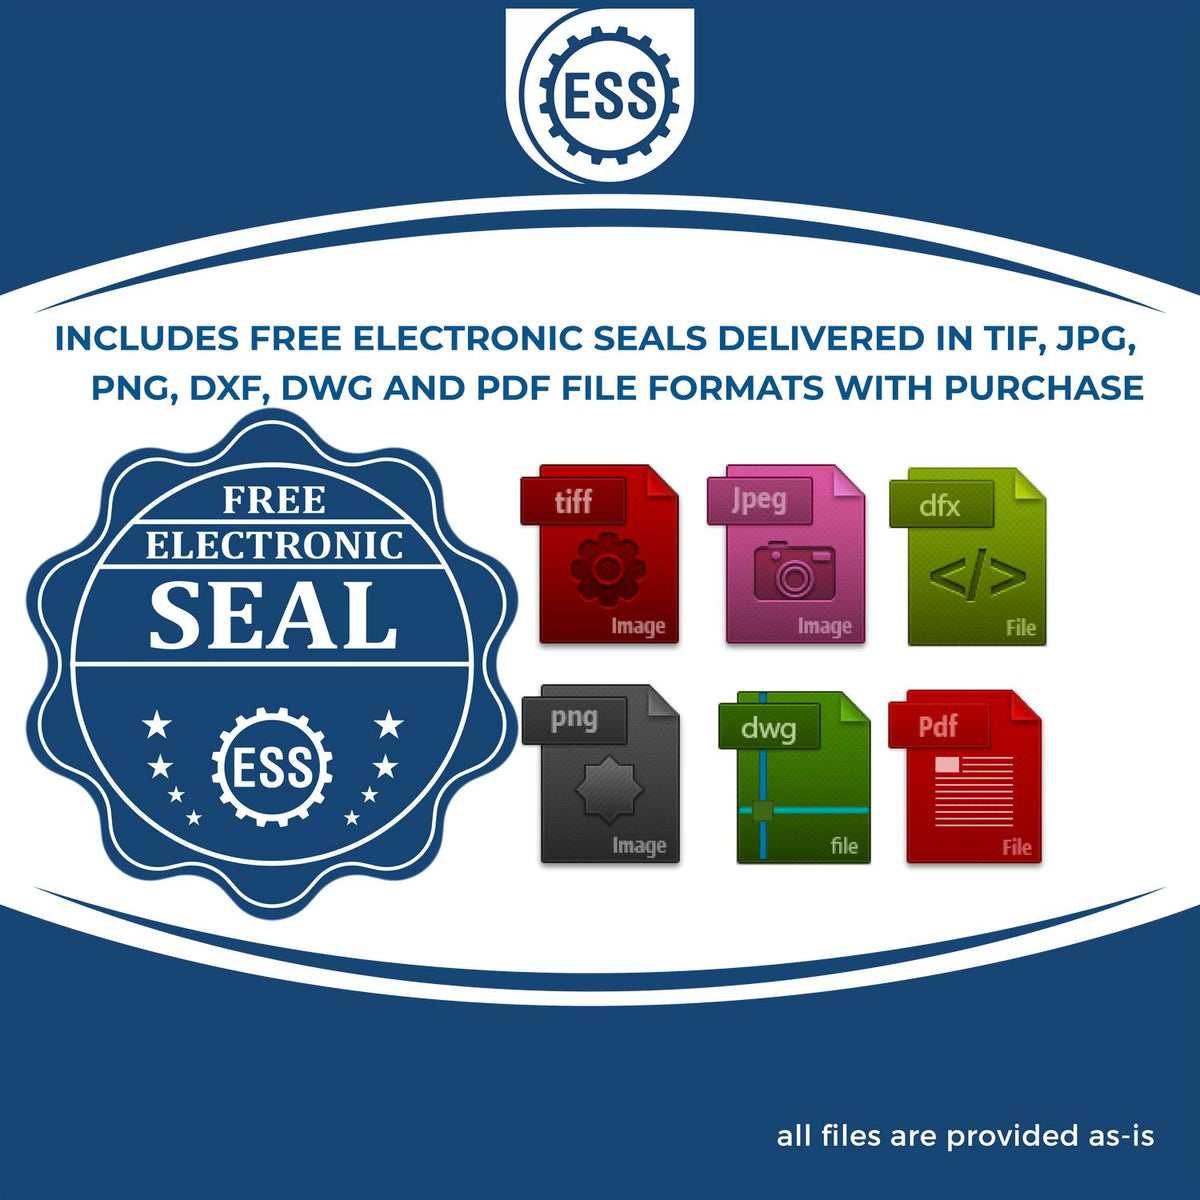 An infographic for the free electronic seal for the Iowa Professional Engineer Seal Stamp illustrating the different file type icons such as DXF, DWG, TIF, JPG and PNG.